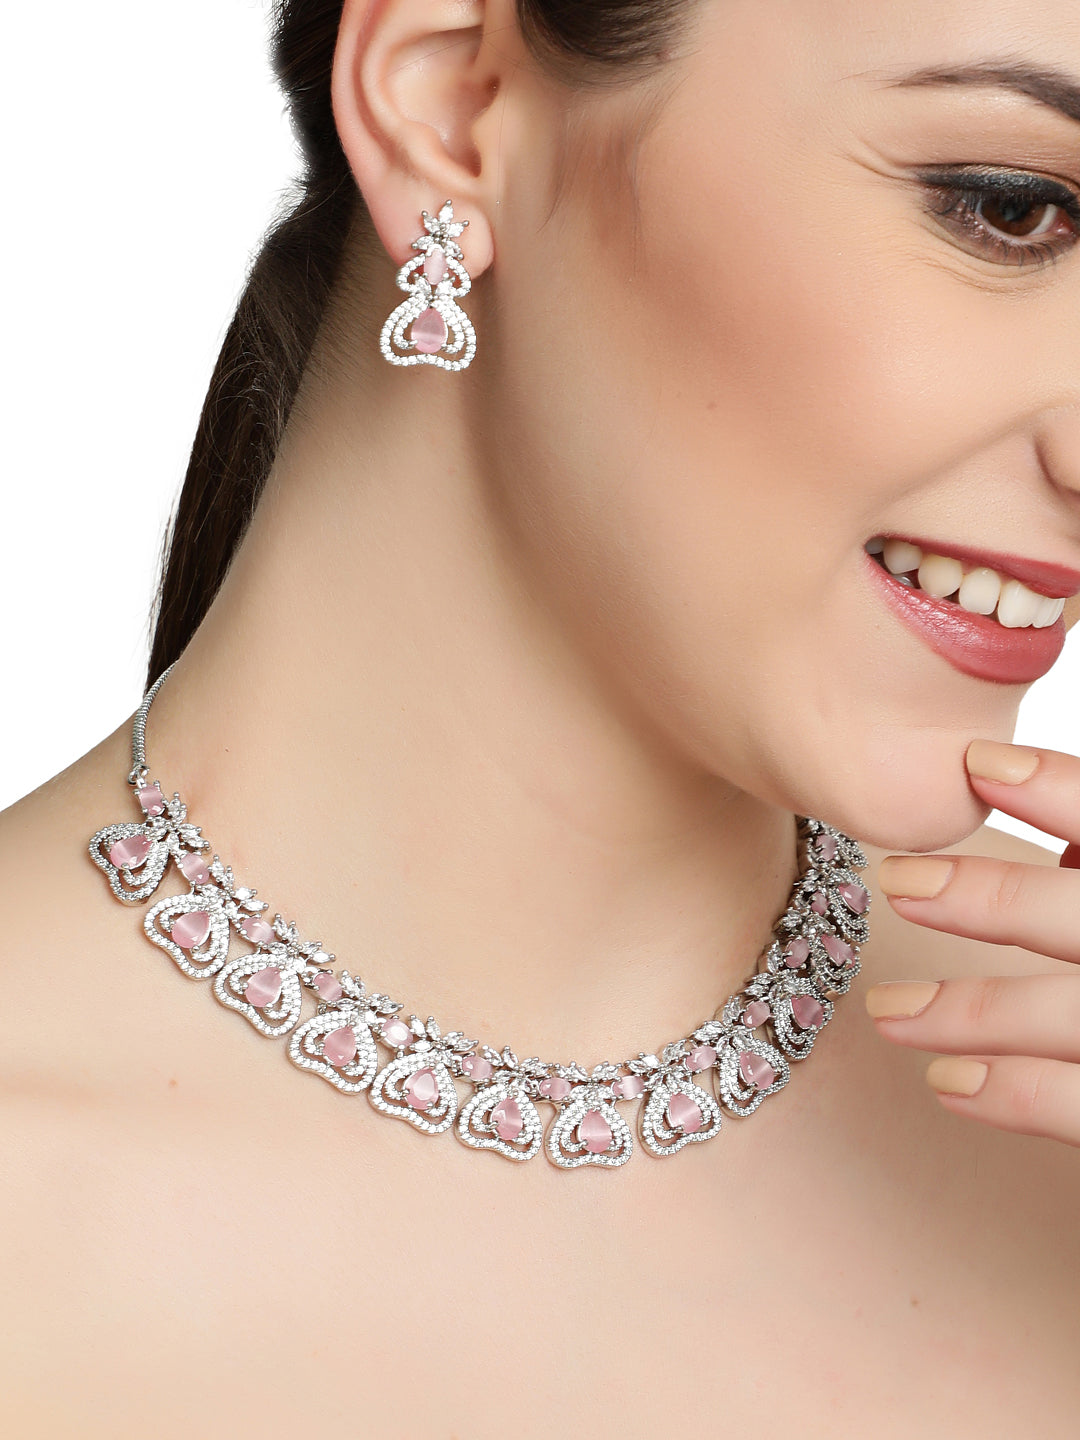 Silver-Plated Crystal Studded Pink American Diamond Handcrafted Necklace Set